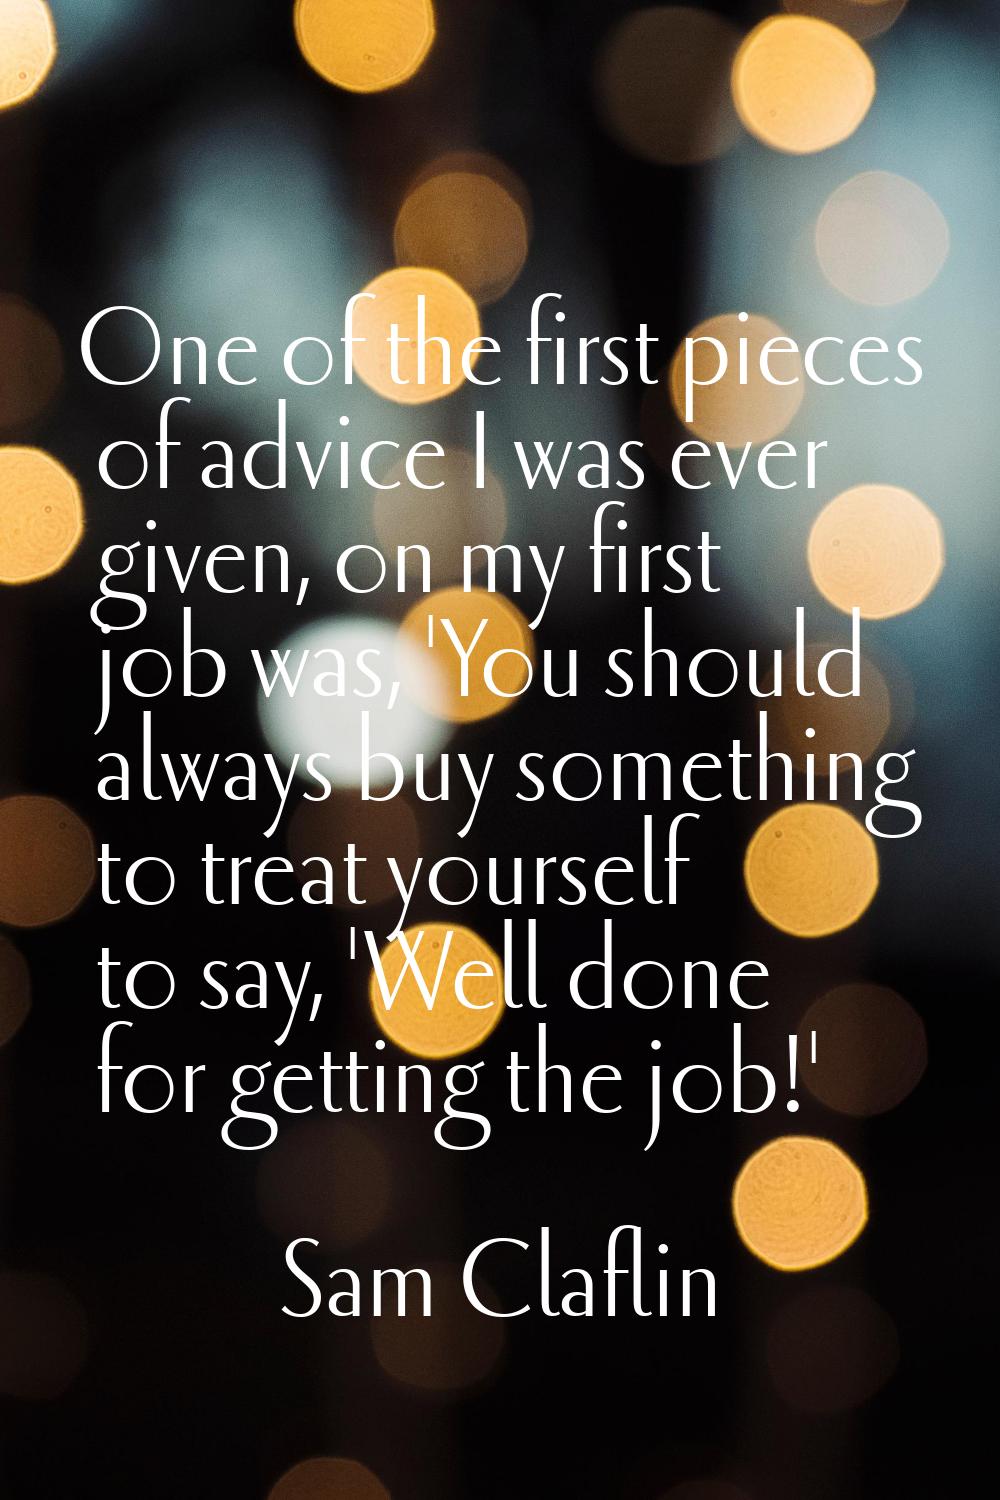 One of the first pieces of advice I was ever given, on my first job was, 'You should always buy som